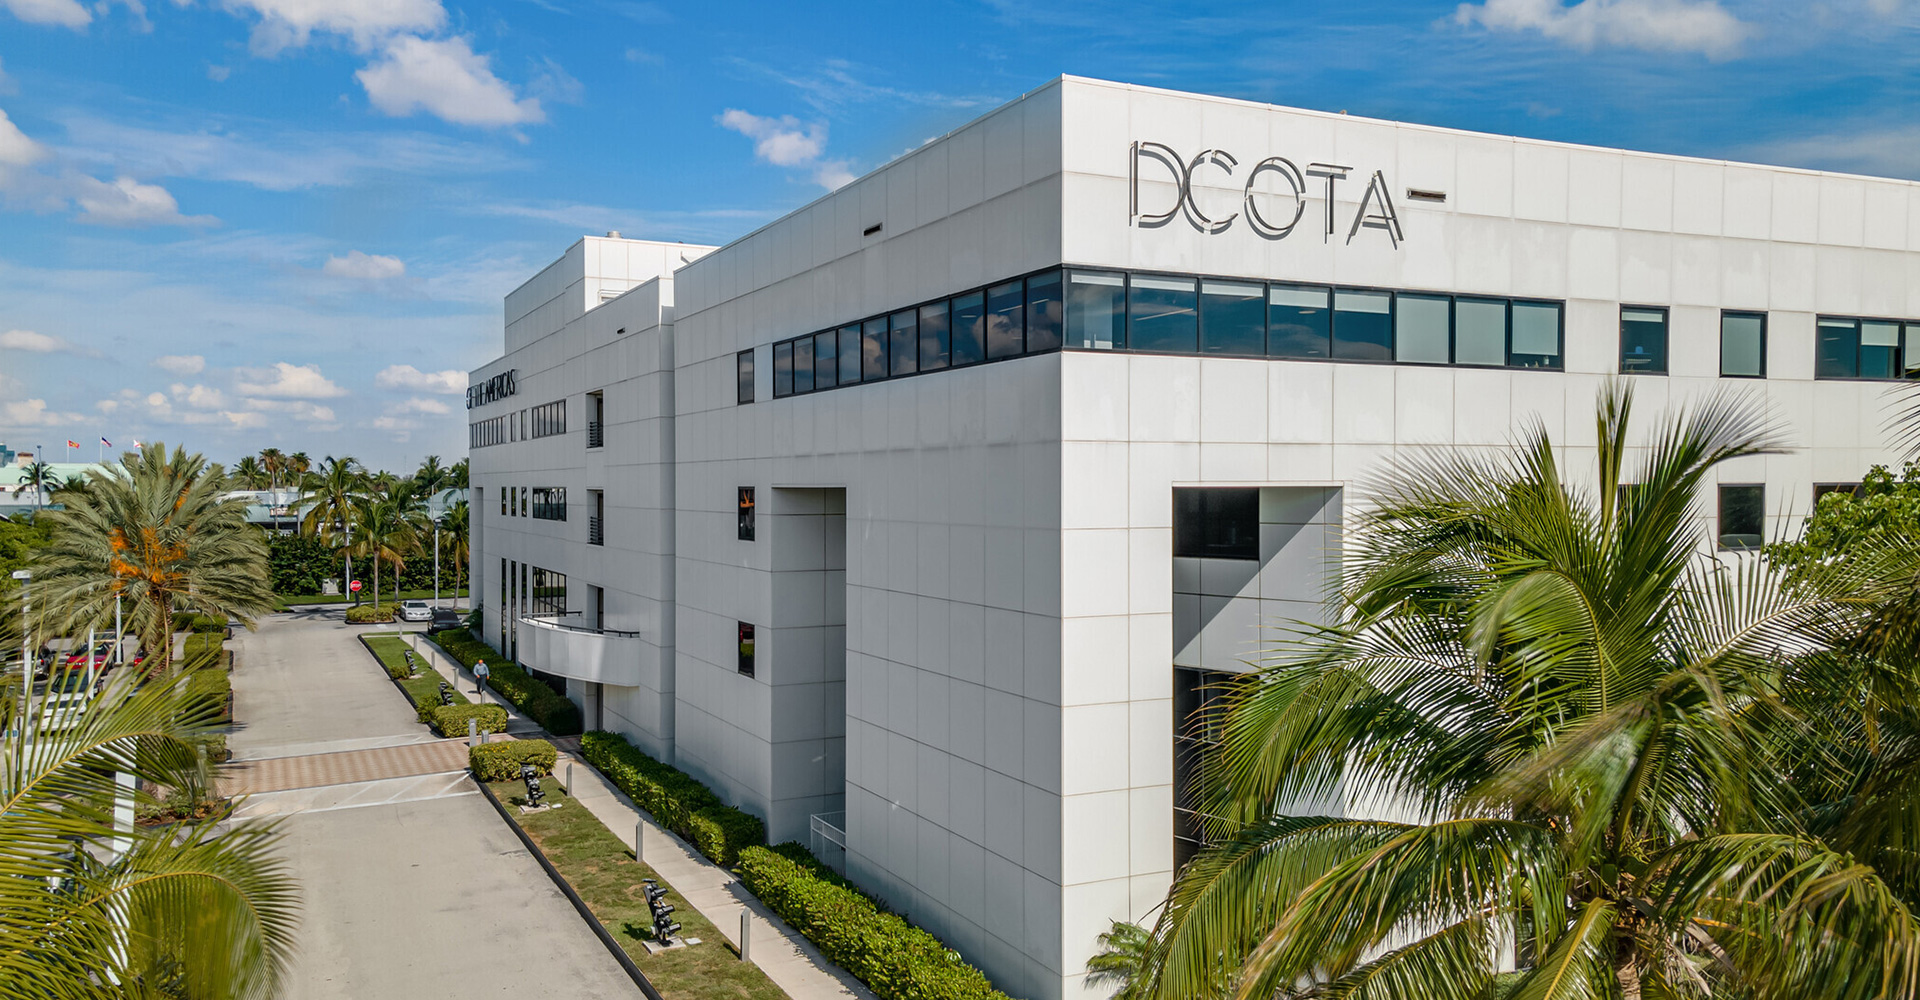 DCOTA by Holland Engineering